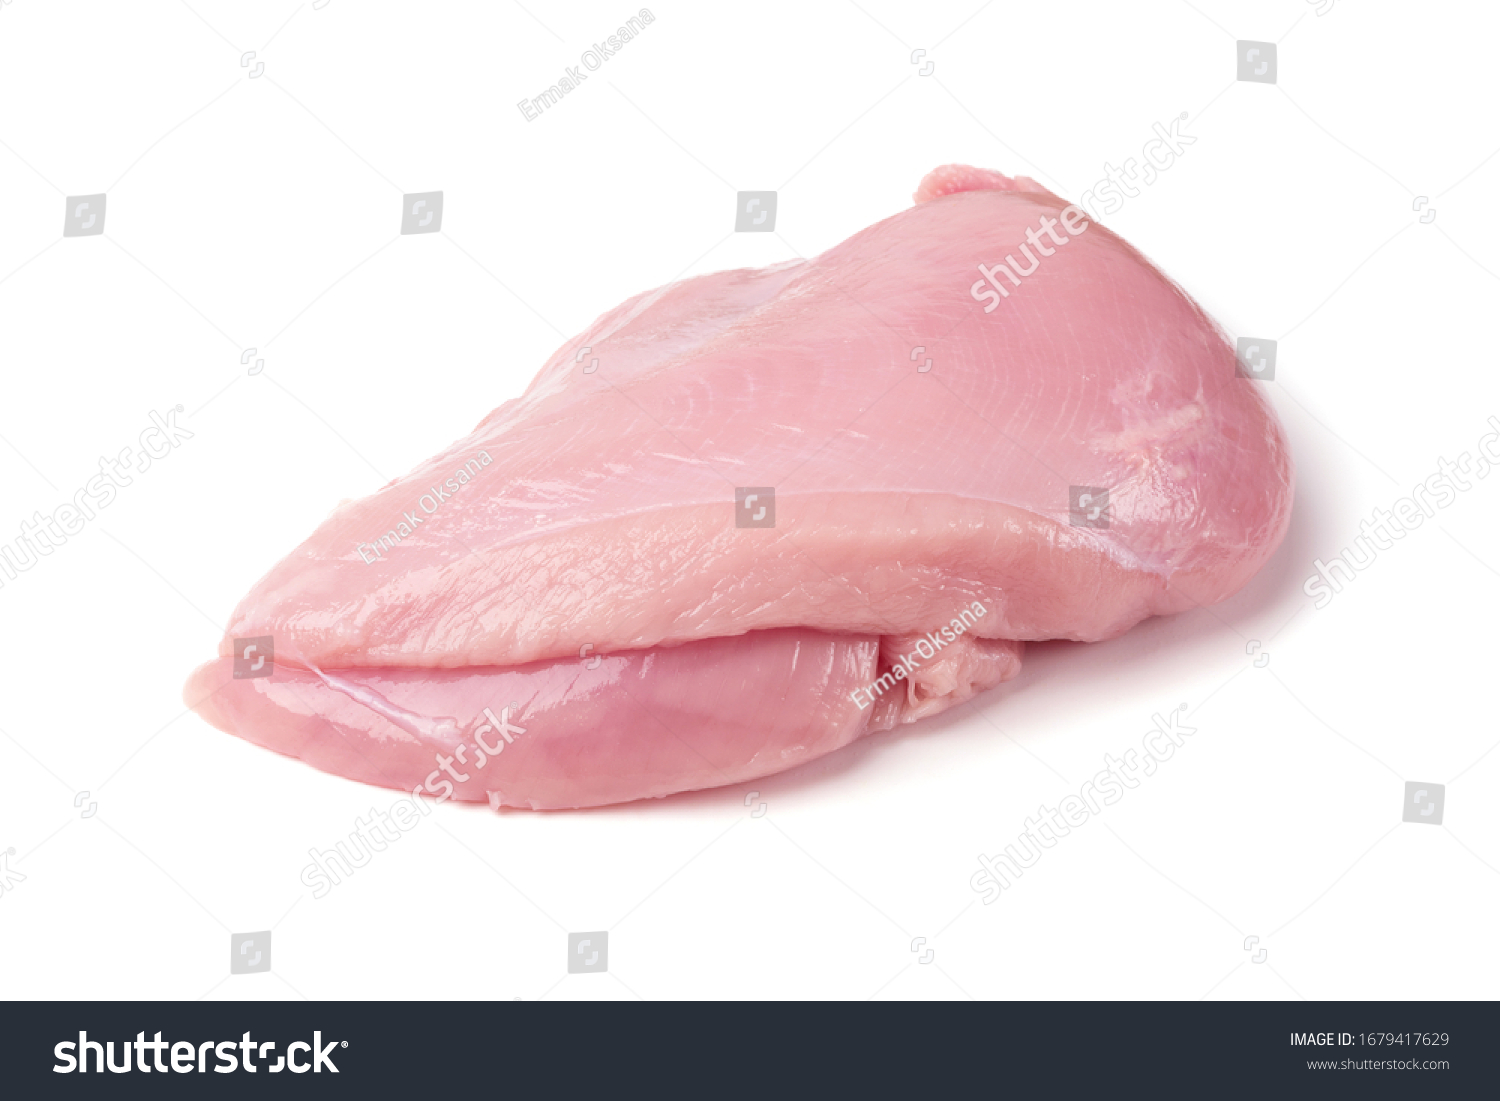 Raw turkey fillet isolated on white background top view. Fresh uncooked turkey breast meat for nuggets or escalope #1679417629